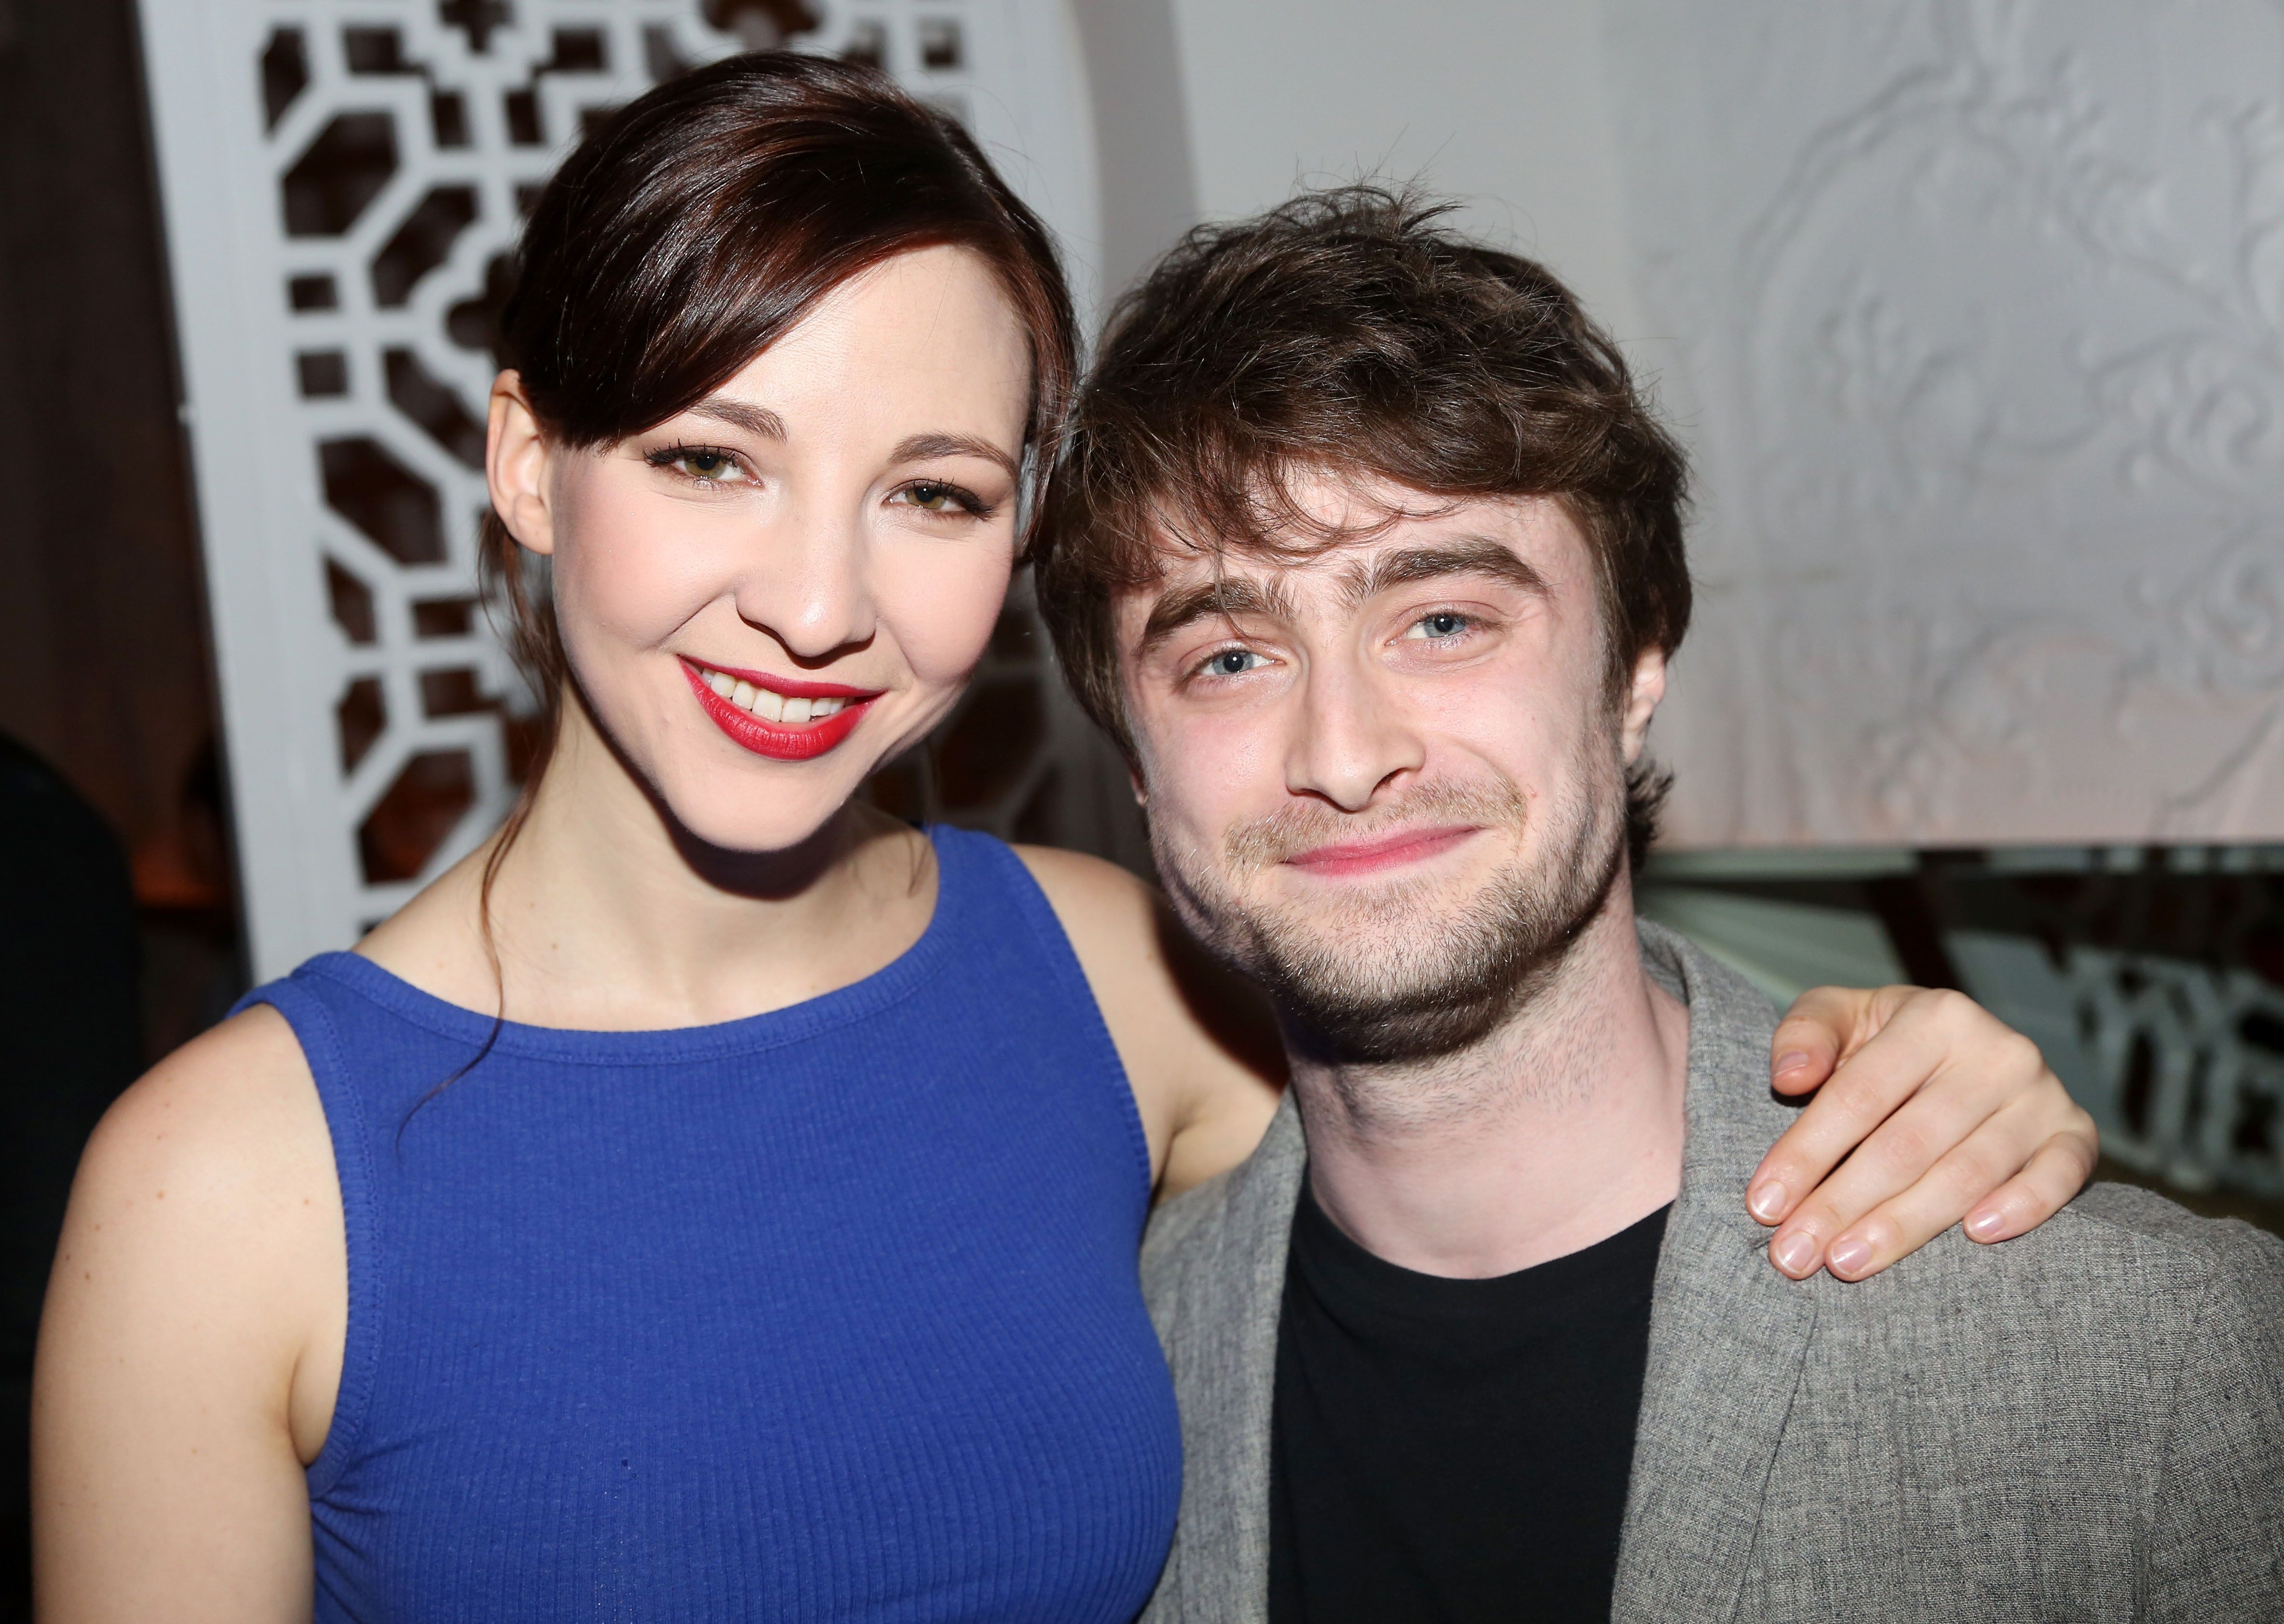 Mobilistic tragedy! The protagonist of Harry Potter Daniel Radcliffe dies